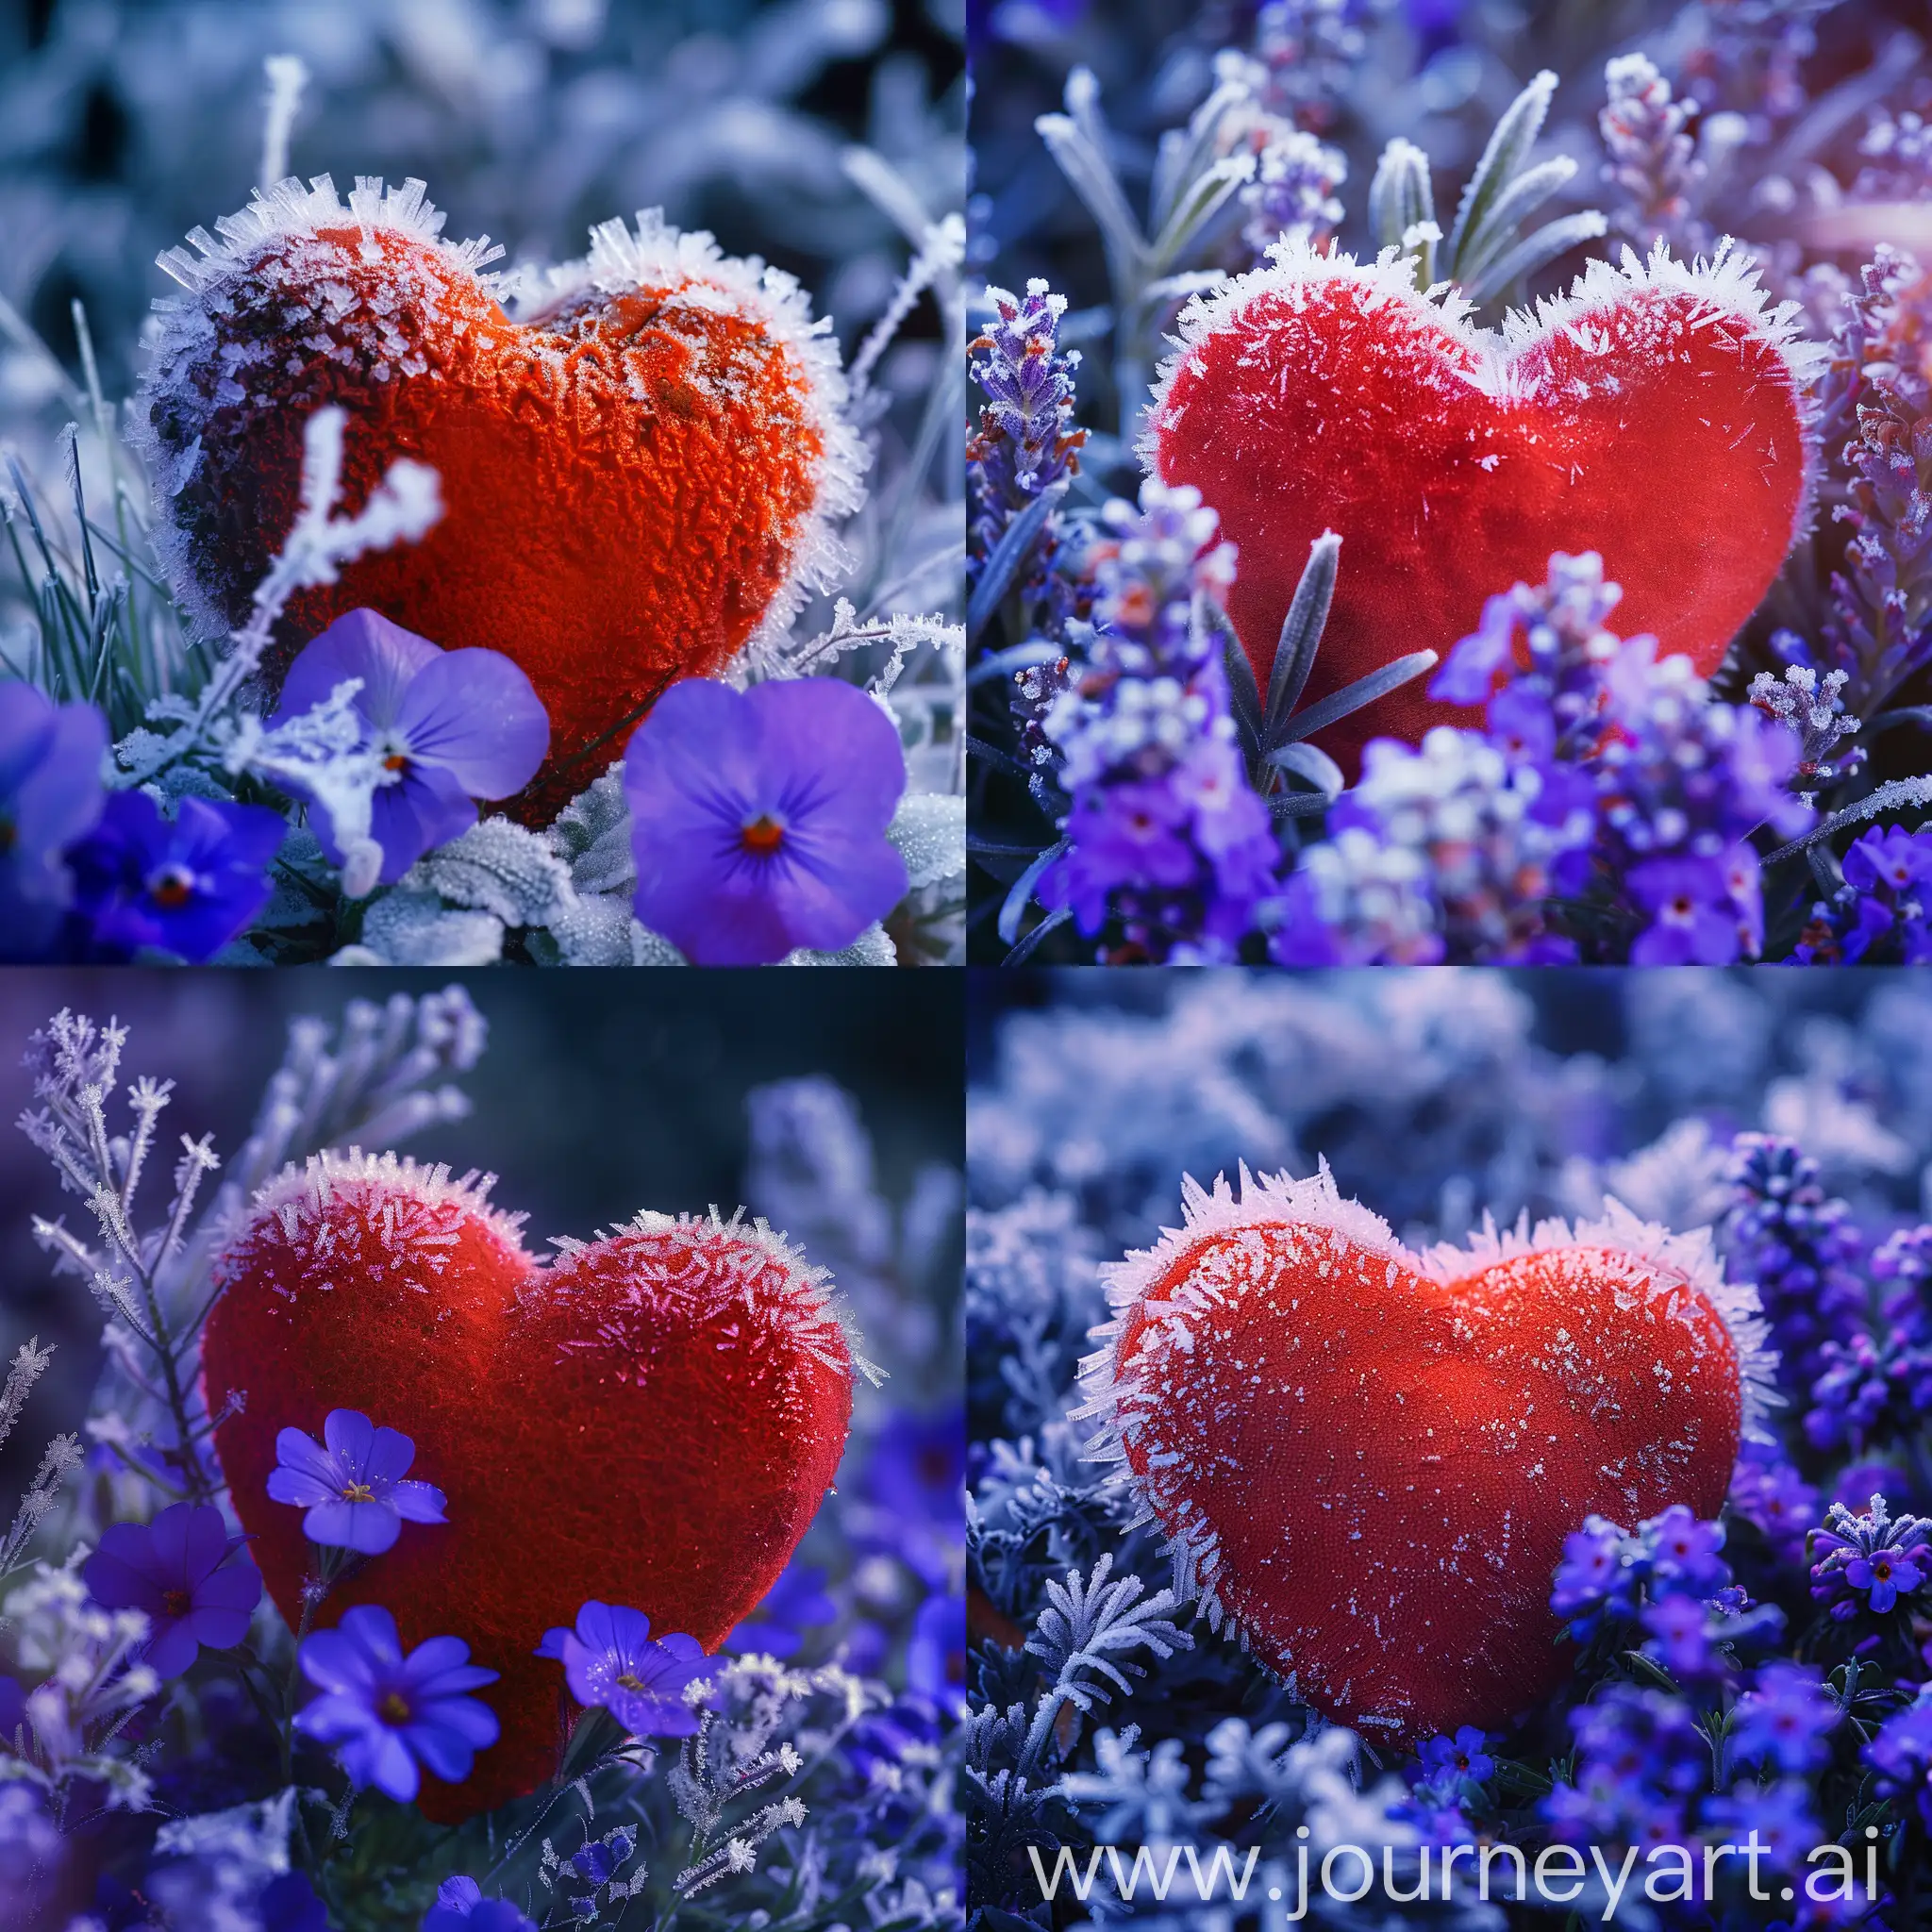 Voluminous-Red-Heart-in-Frost-Surrounded-by-PurpleBlue-Flowers